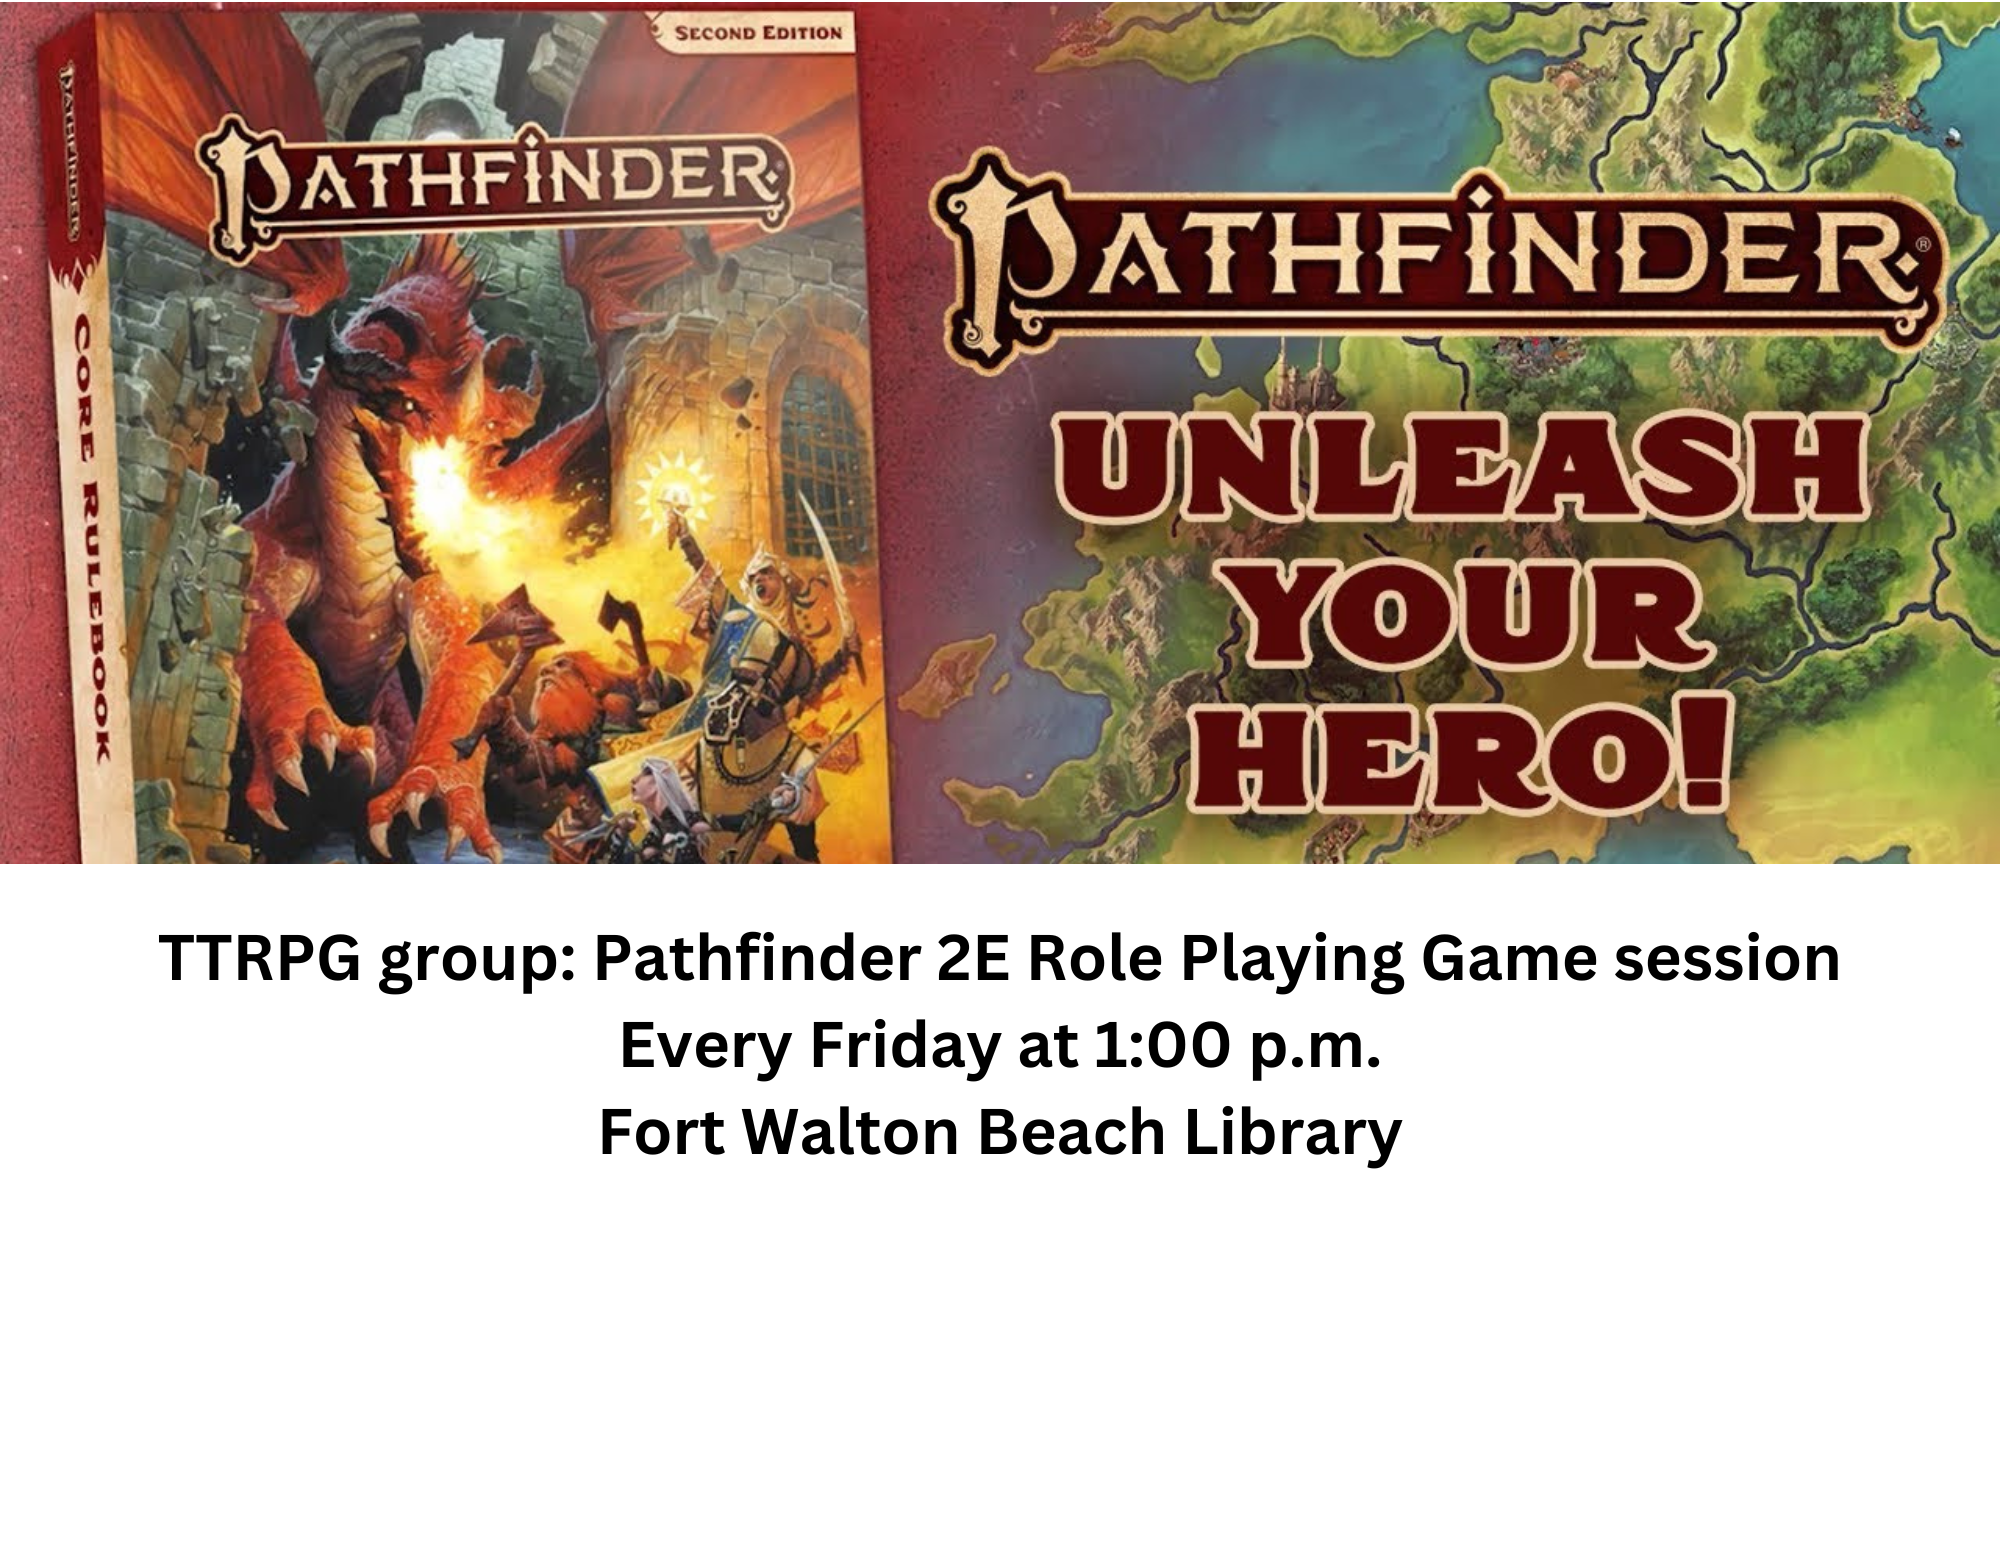 TTRPG Group - Pathfinder 2e Role Playing Game session